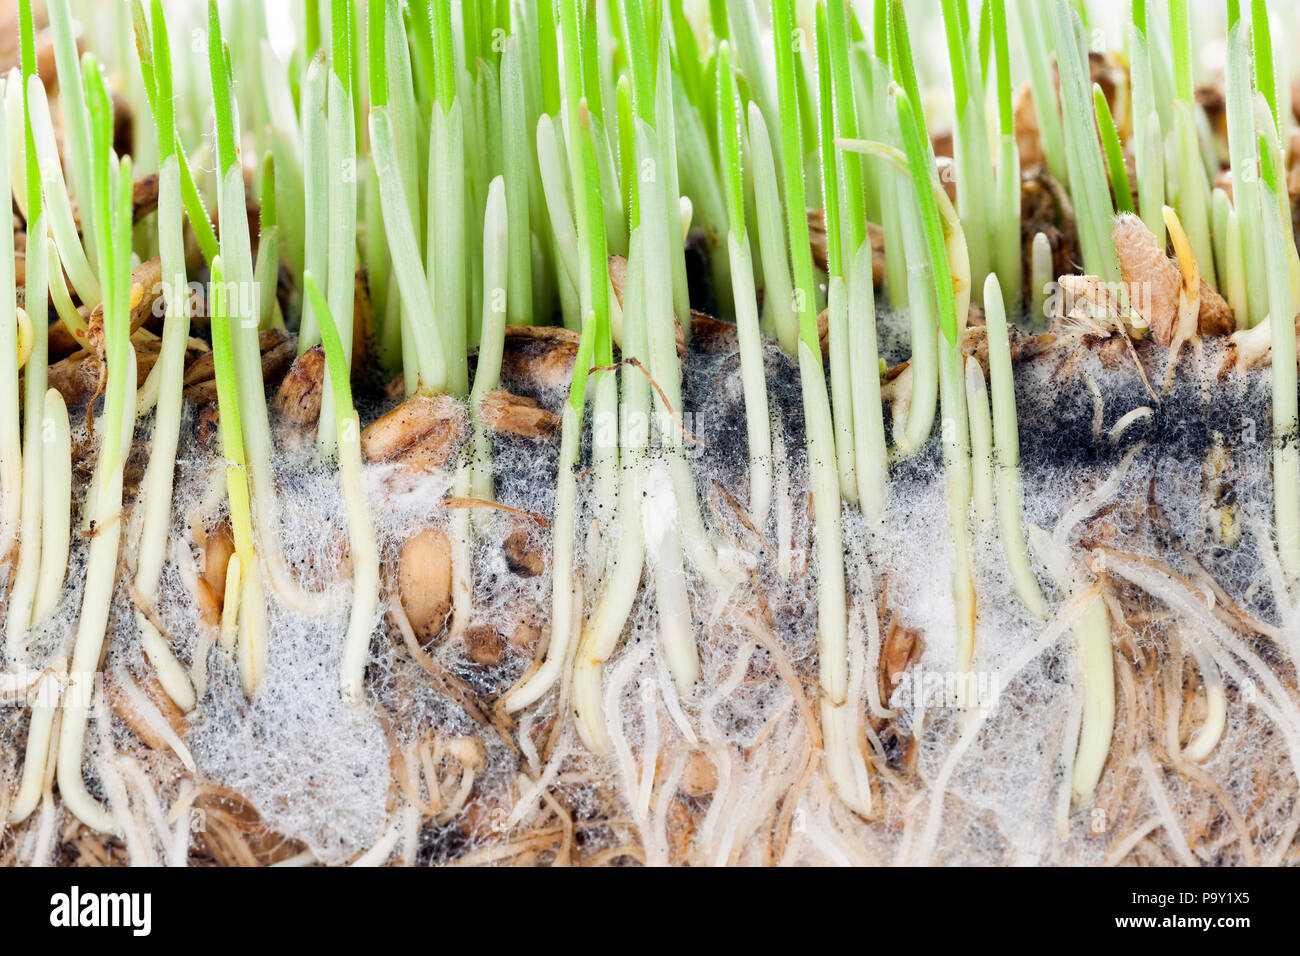 green sprouts and white roots with black spots of grown wheat, closeup Stock Photo